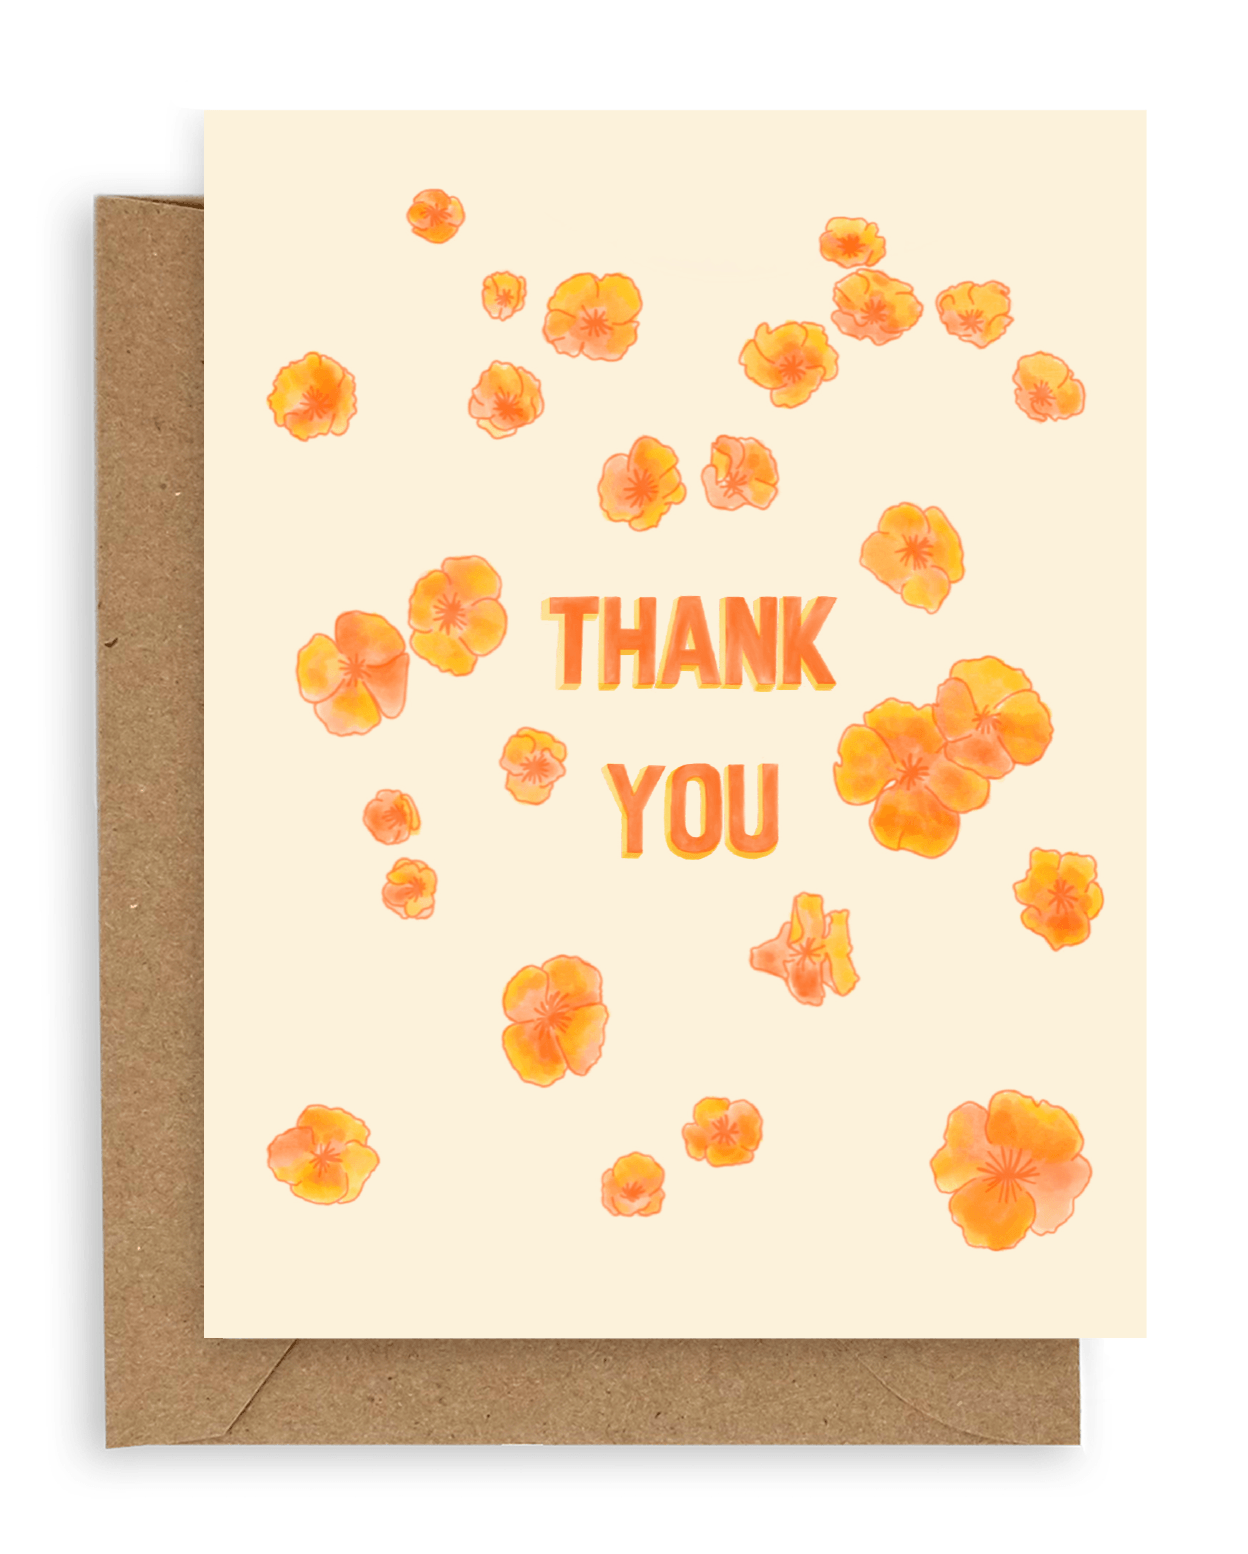 Orange California poppies surround the words "thank you" in orange font printed on a cream background. Shown with kraft envelope.